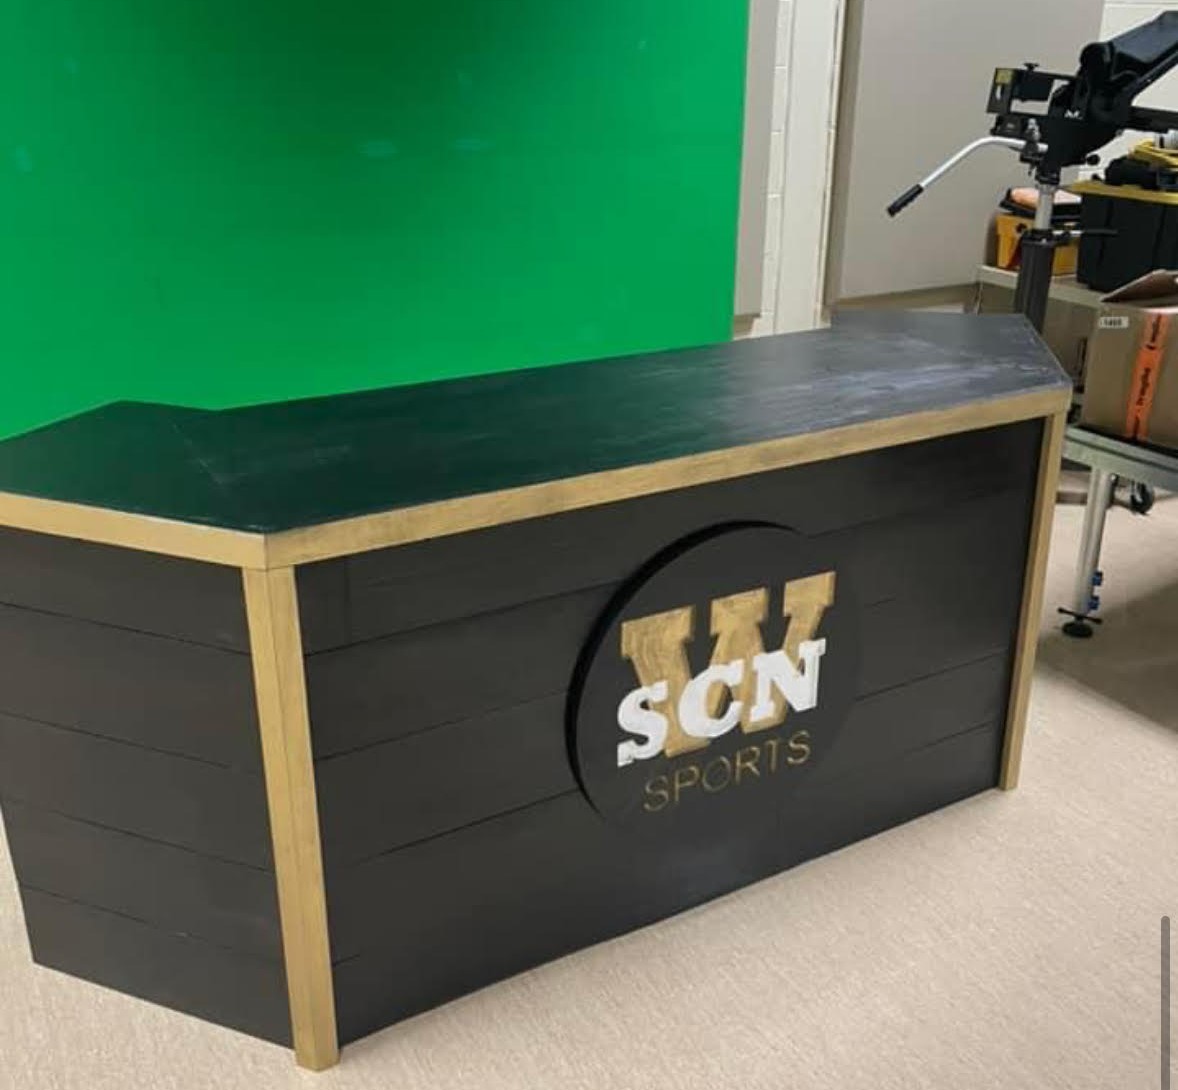 WGH’s WSCN studio gets upgrade with student-made desk